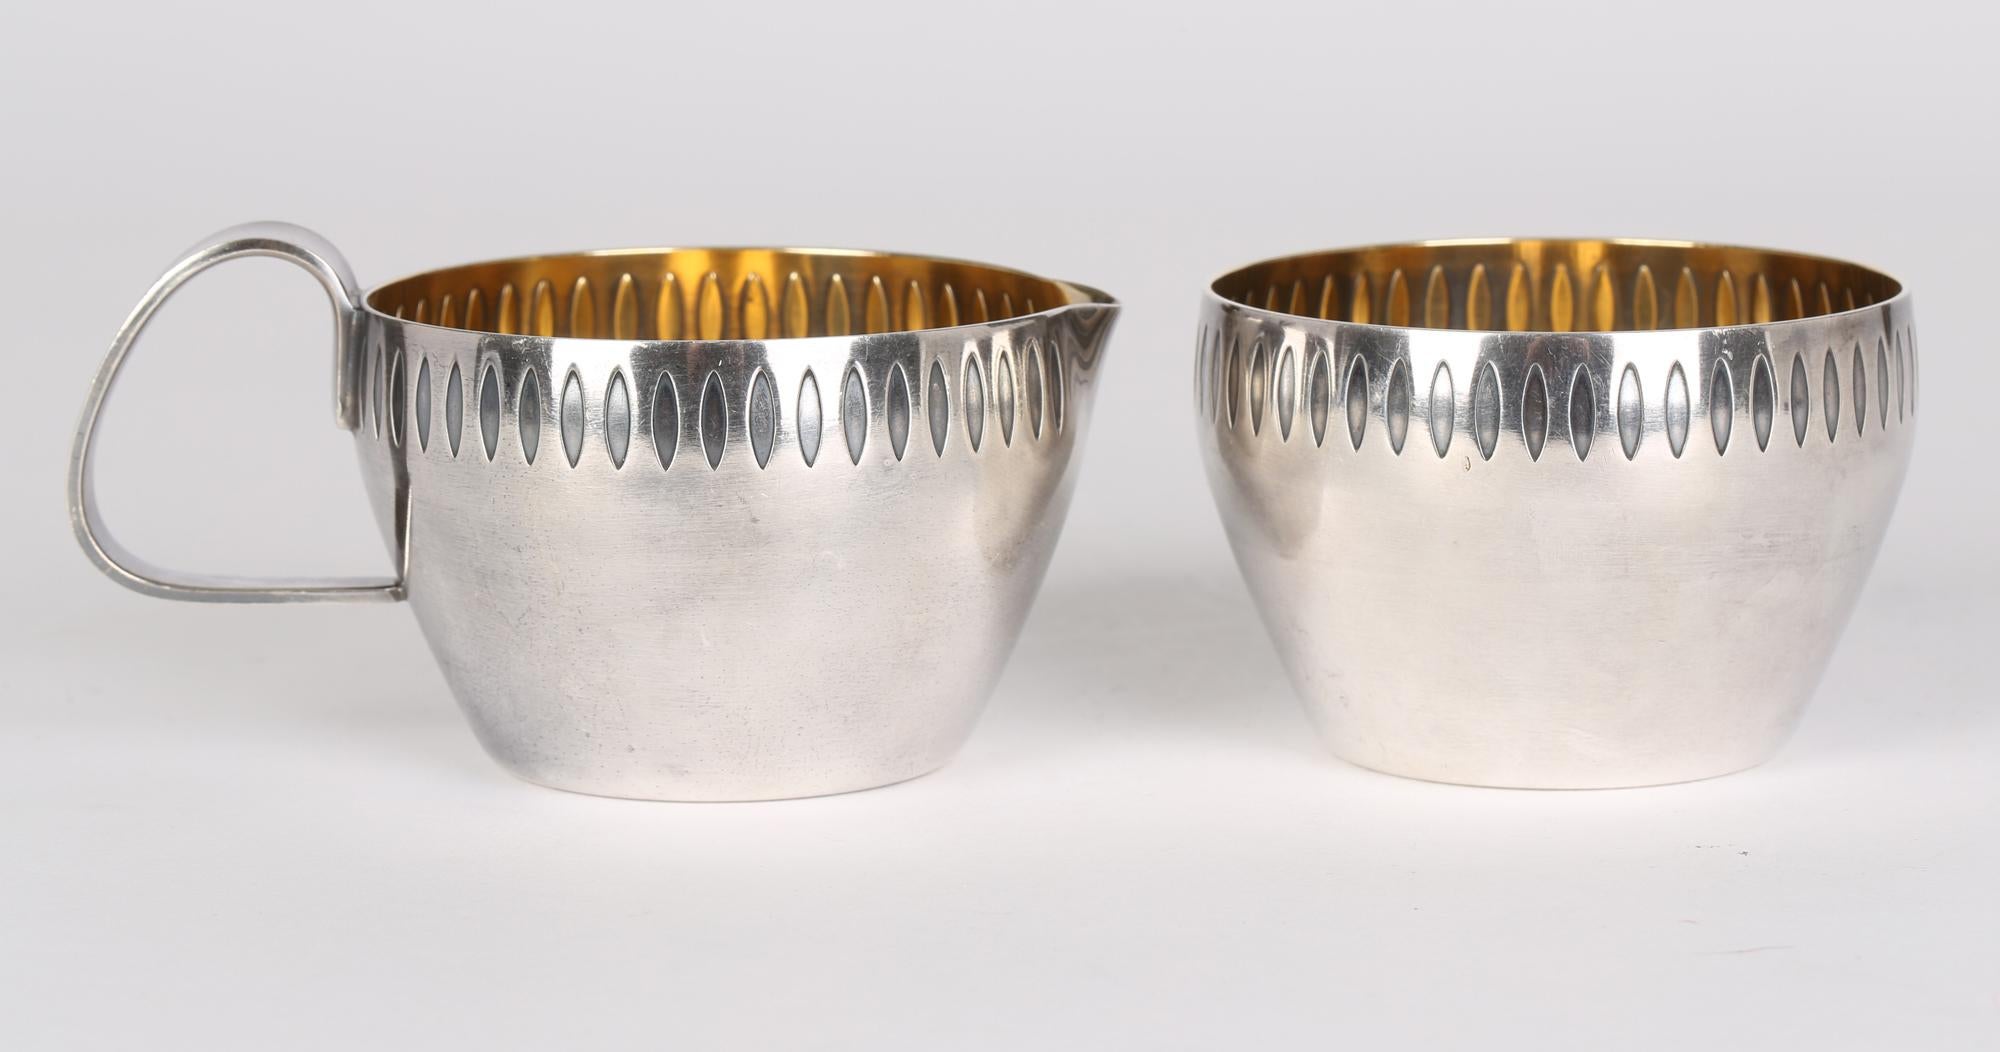 Stylish WMF (Würtemburgische Metallwaren Fabrik) Art Deco silver plated sugar bowl and cream jug with an impressed seed design dating from around 1935. The simply formed but quality pieces are made in thick gauge metal with a silvered exterior and